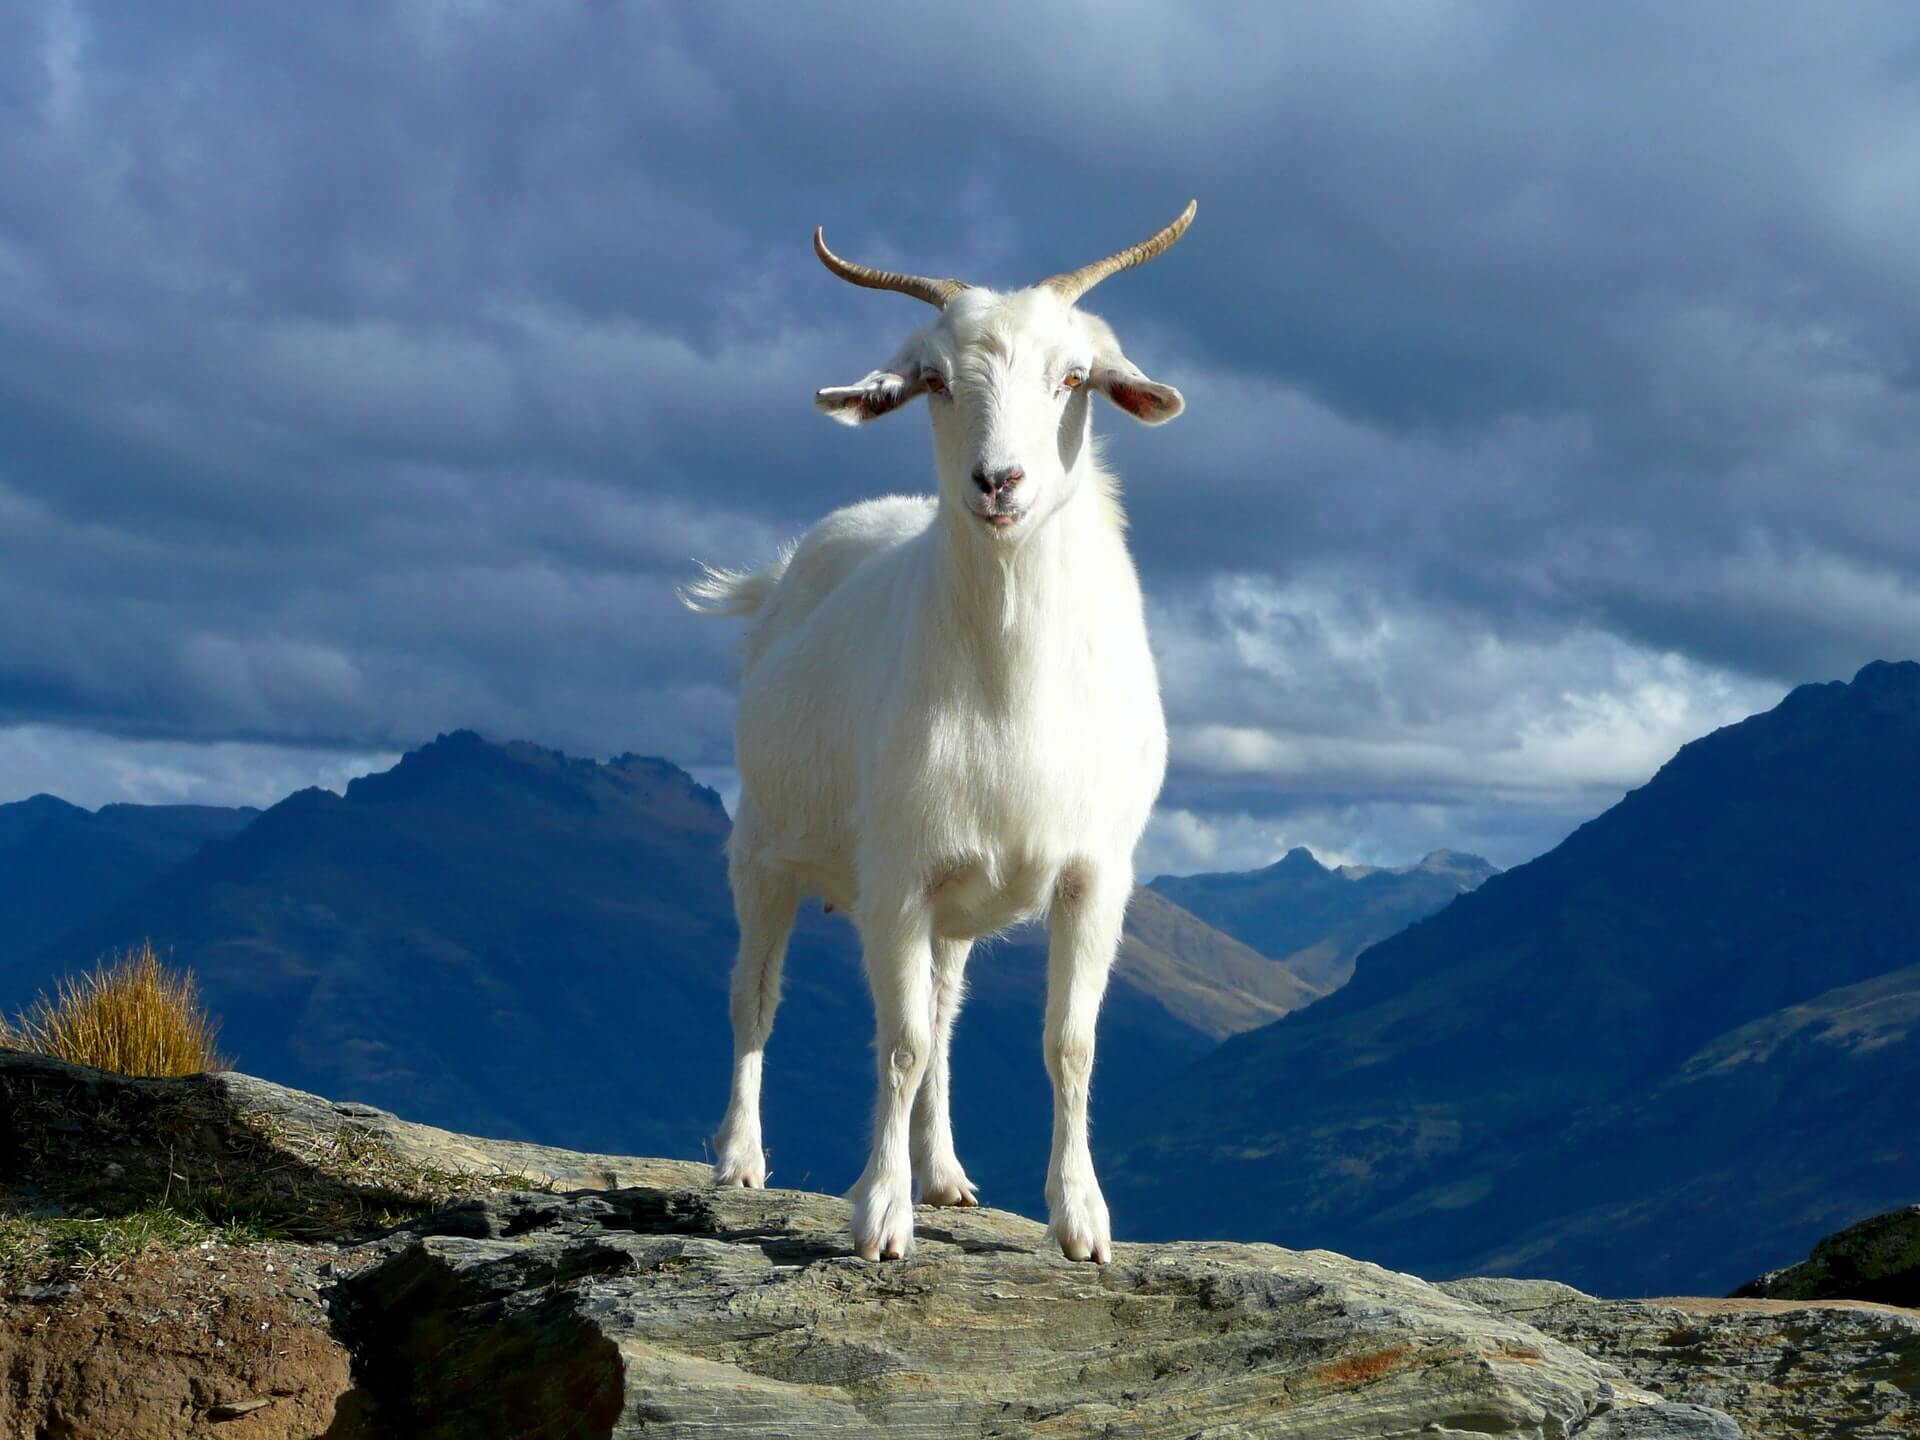 A goat backpacking Queenstown on a shoestring budget (without a backpack or shoestrings)